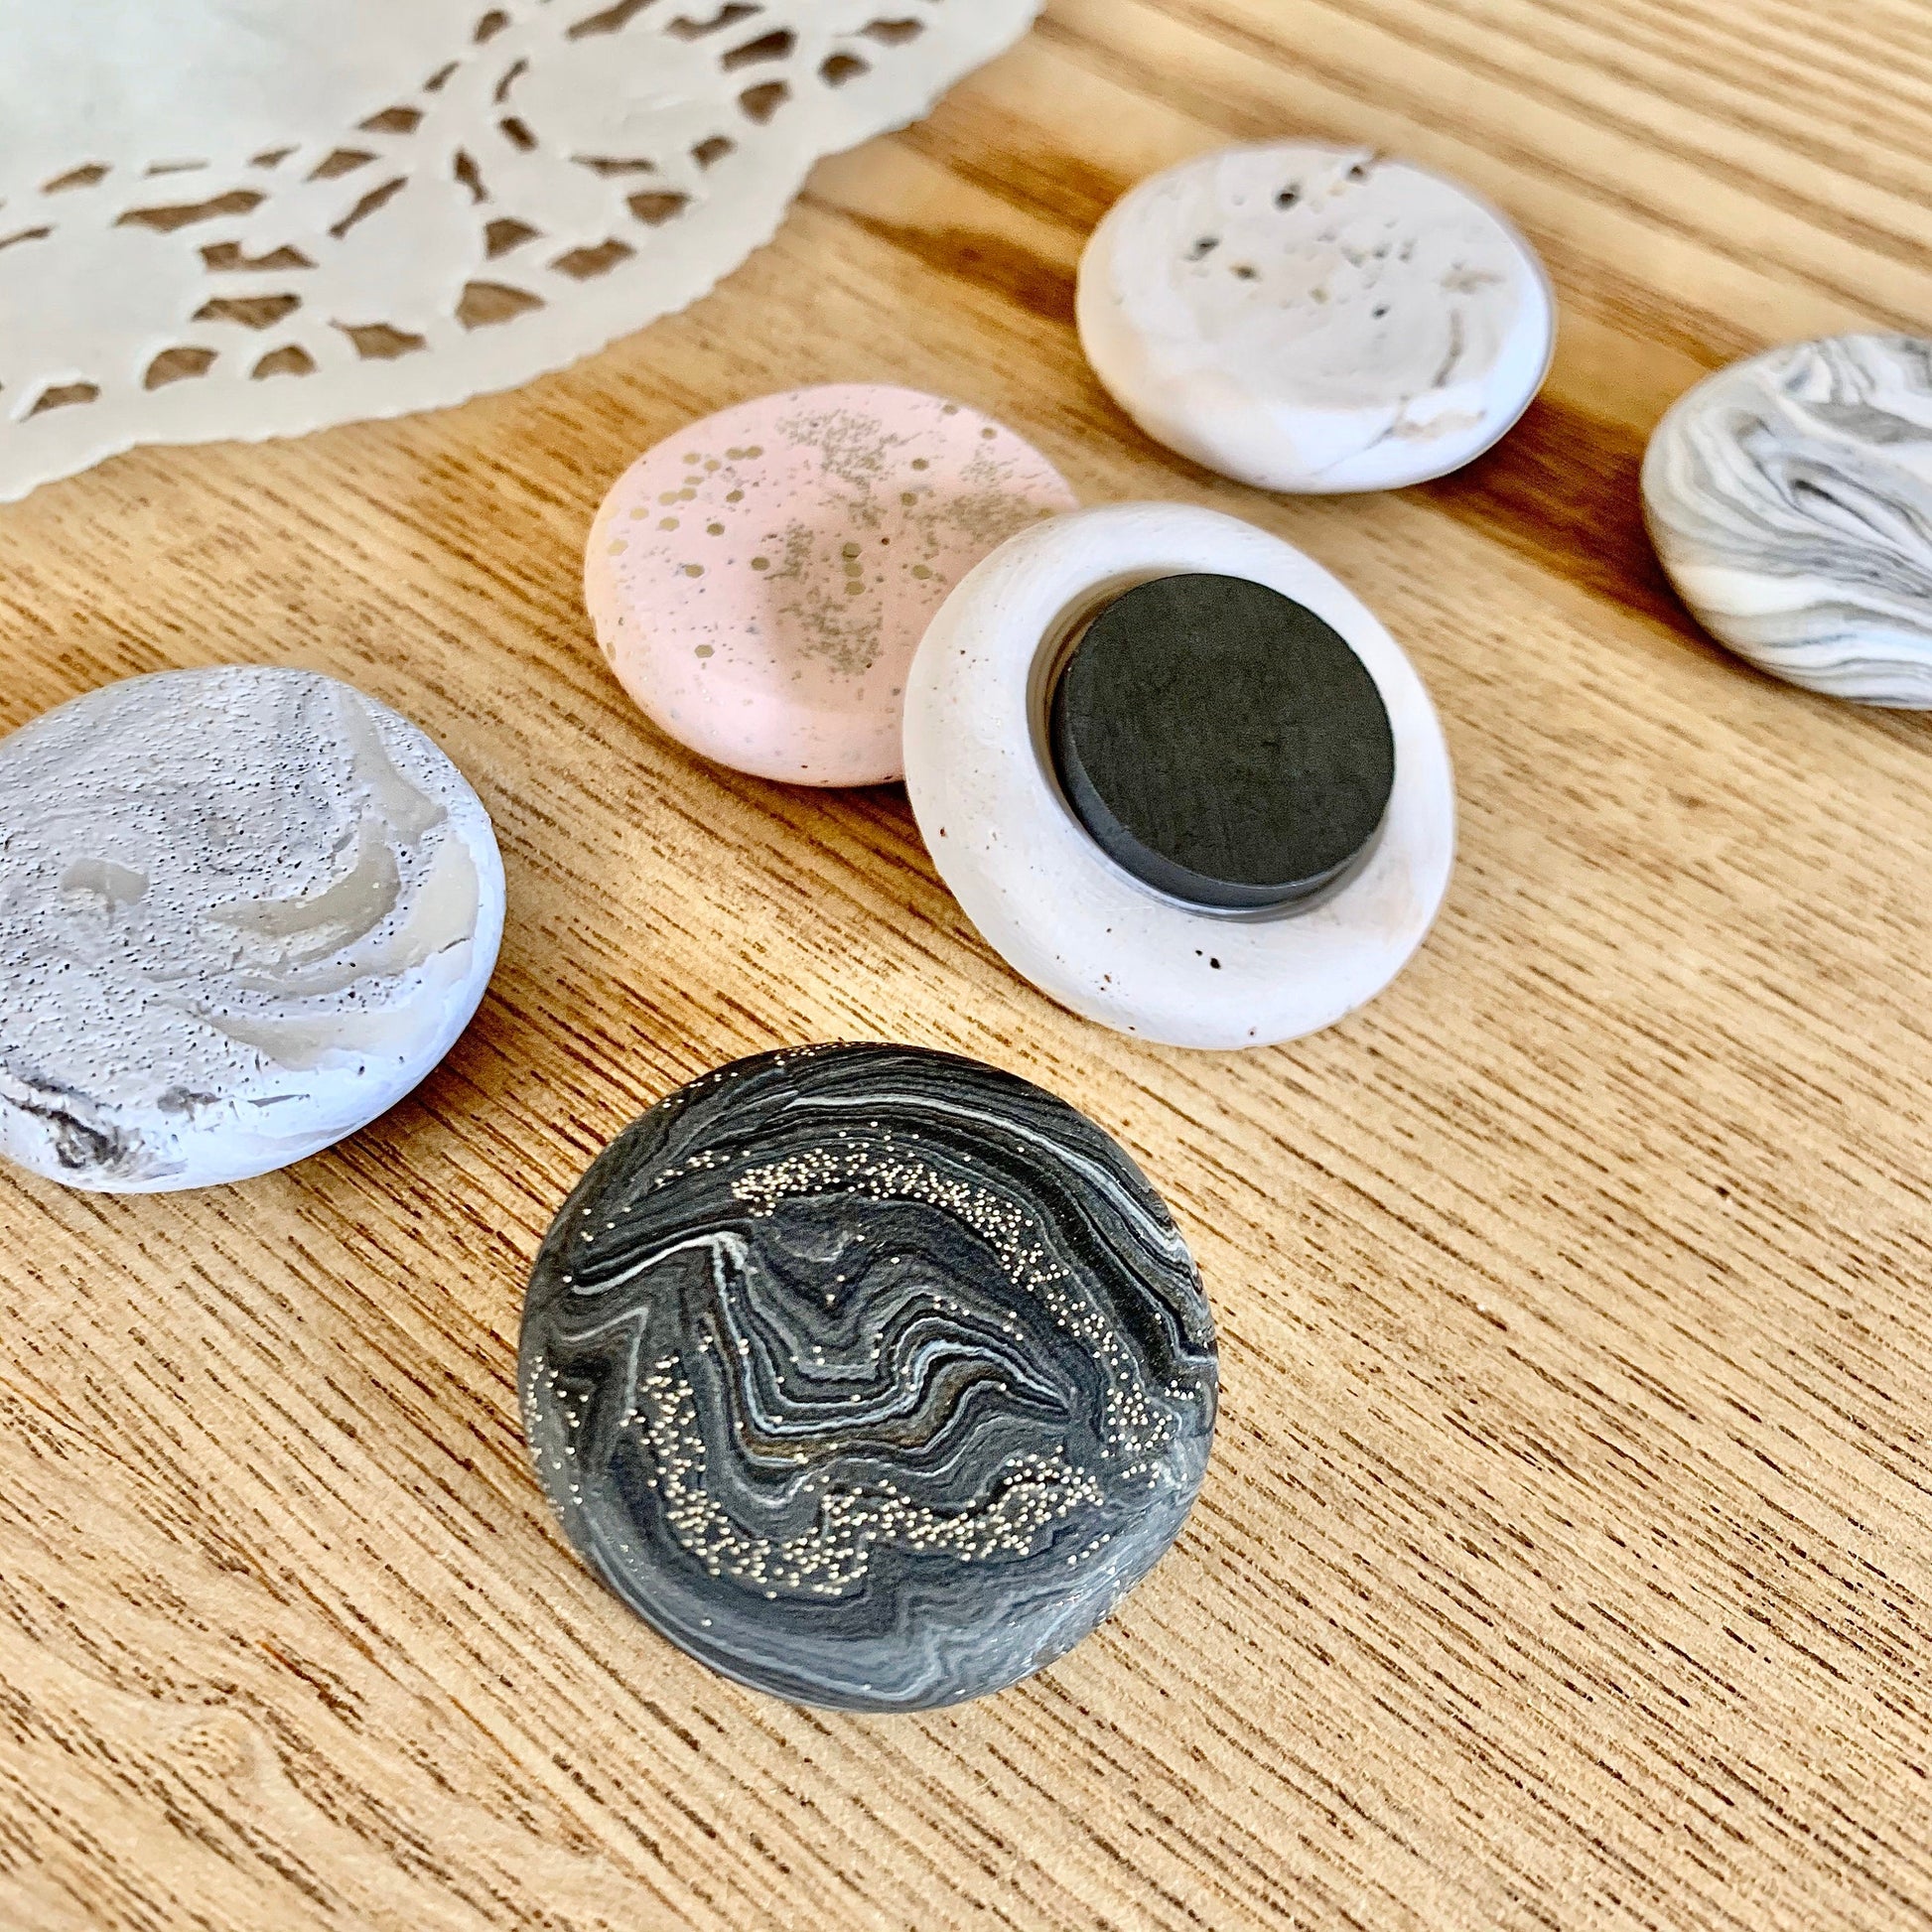 Handmade polymer clay fridge magnets, magnet set 6 or 12 pack, whiteboard kitchen decor, natural stone colours, neutral marble textured